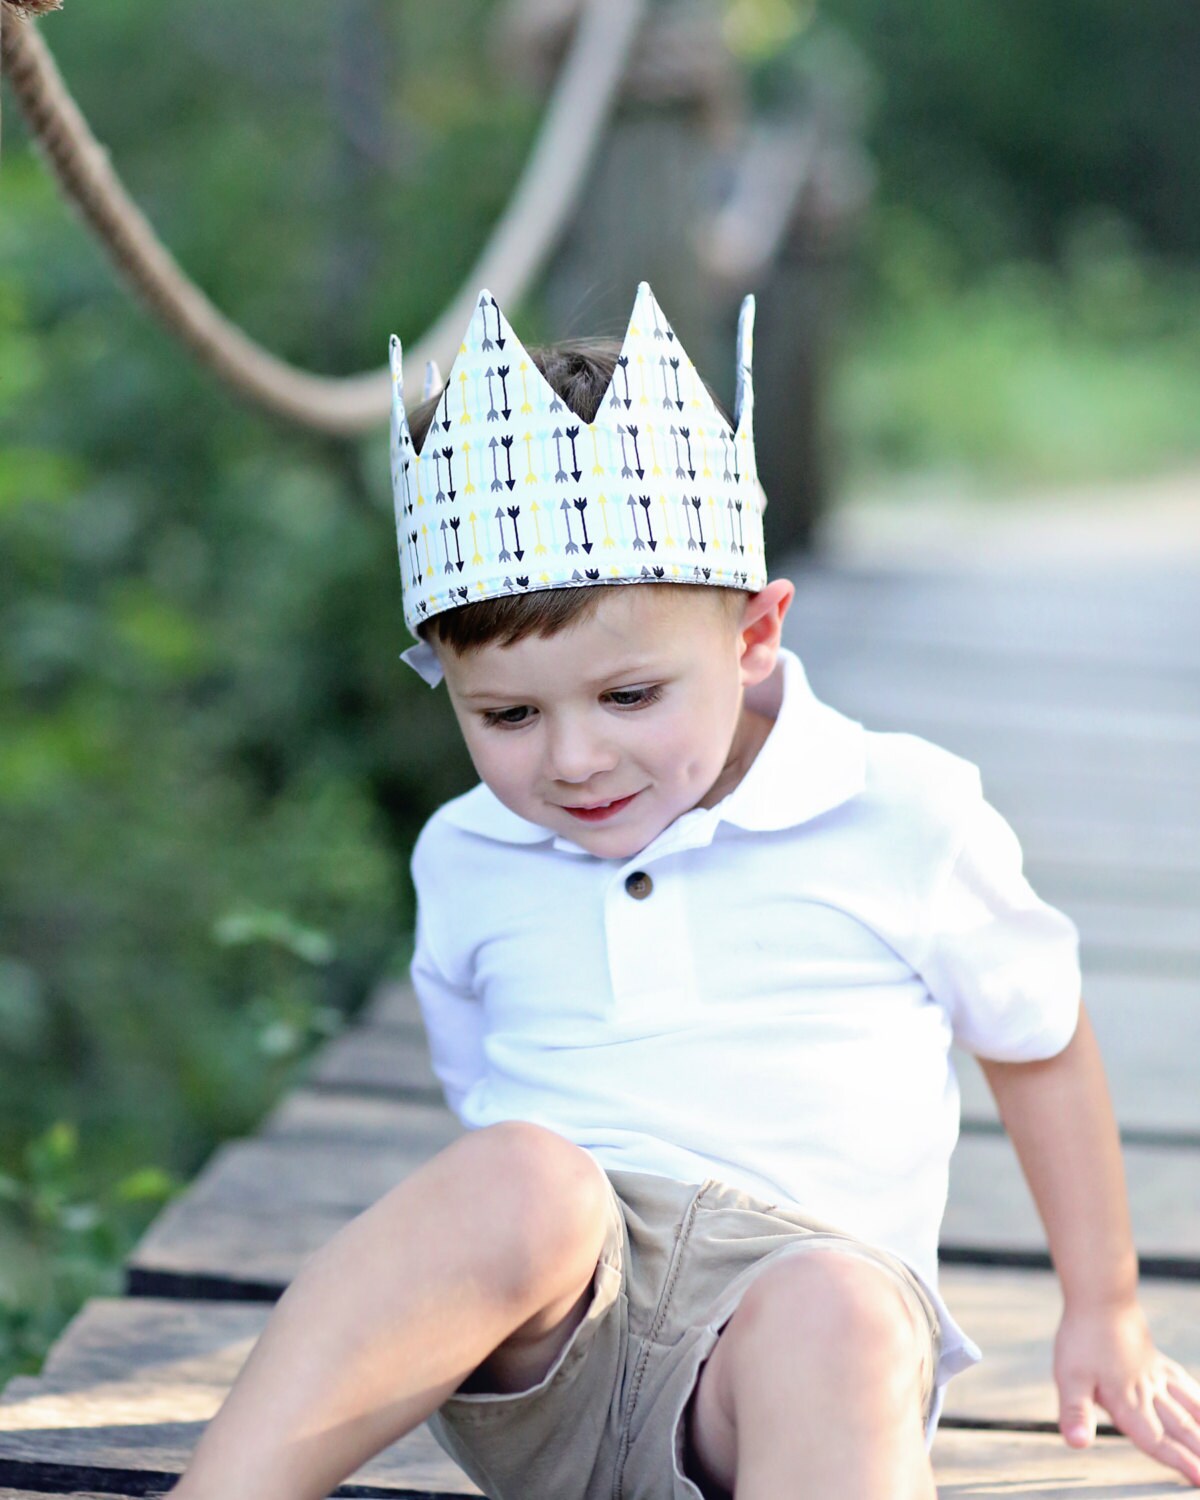 Dress Up Crown - Sequin Crown - Birthday Crown - Gray Arrow Crown Reverse Yellow, Aqua and Gray Arrows - Fits all